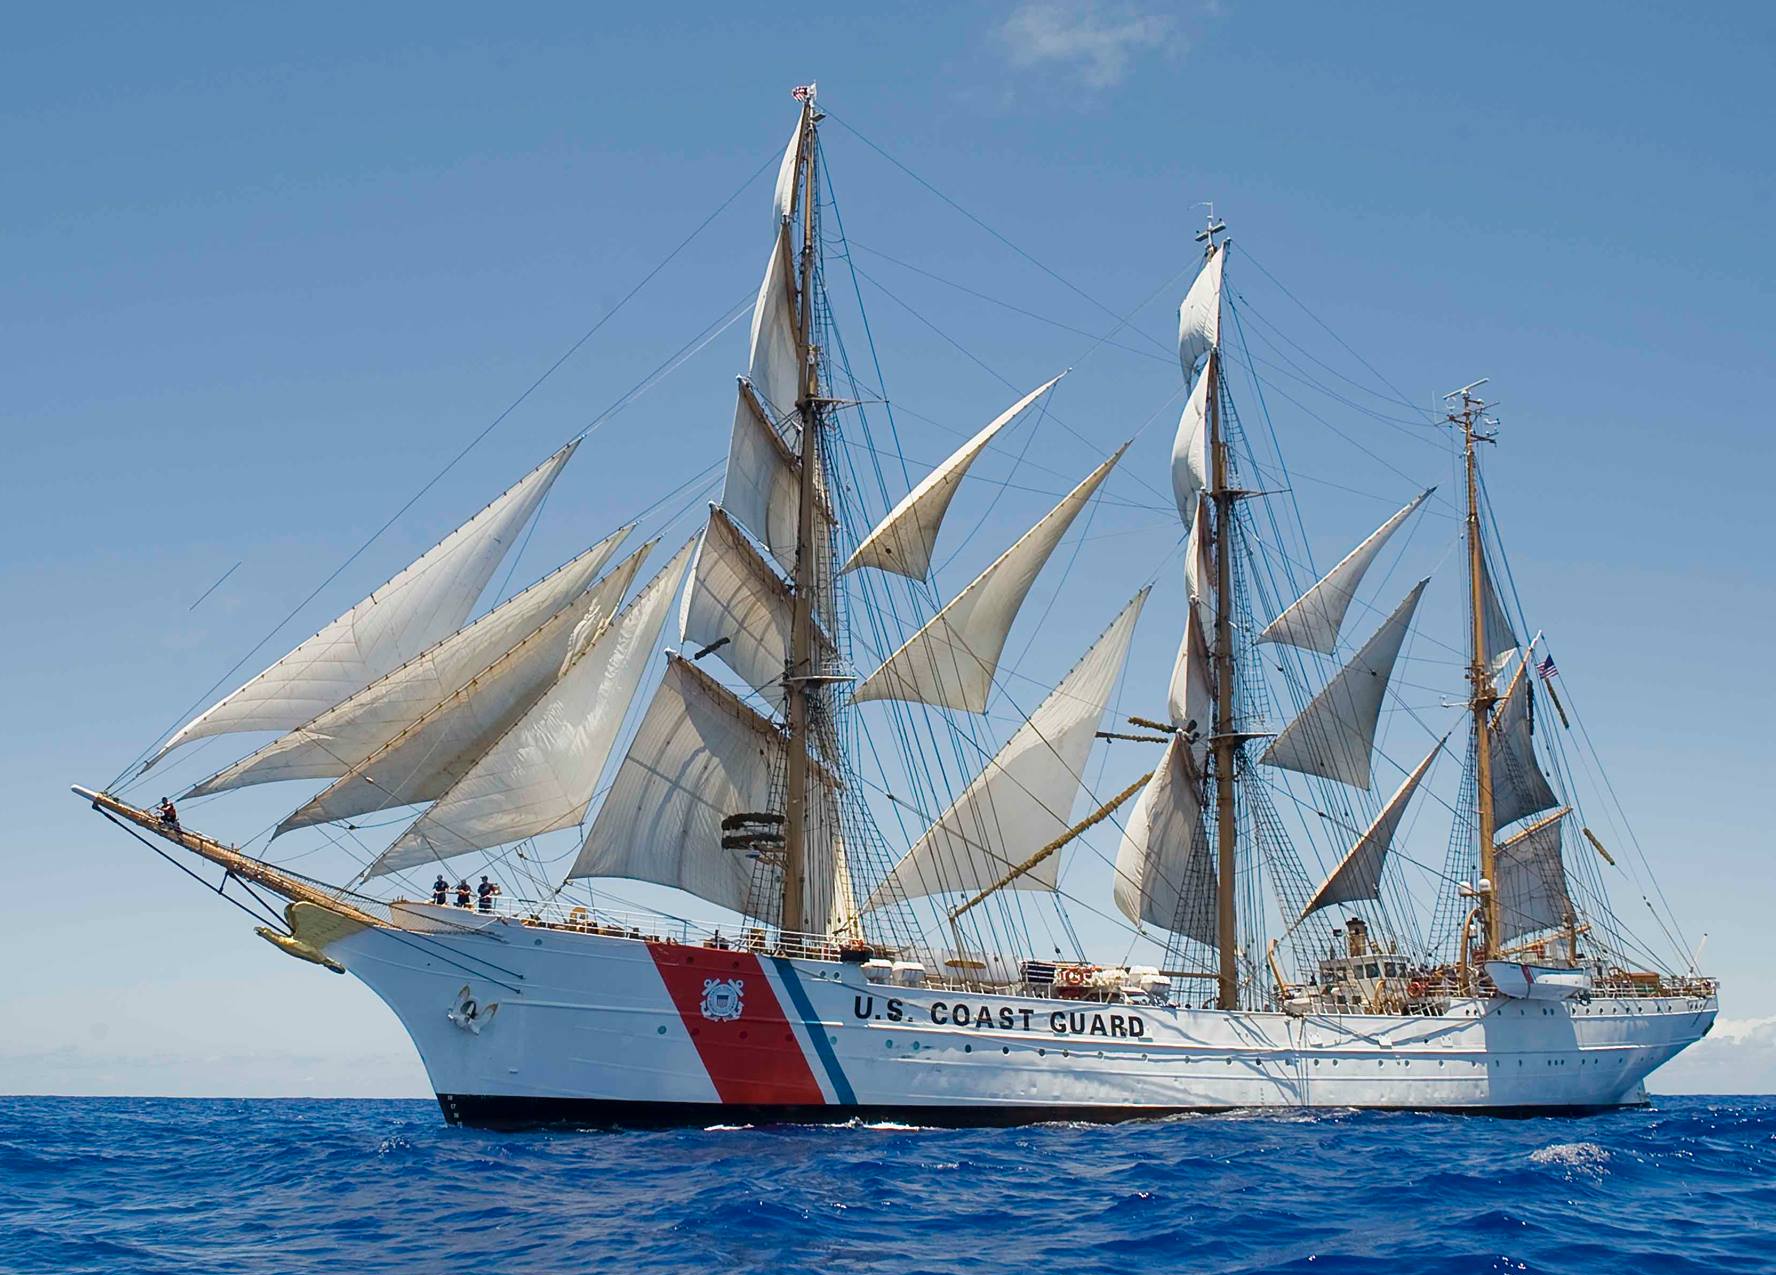 The exterior of a large ship with multiple white sails on deep blue sea under blue sky